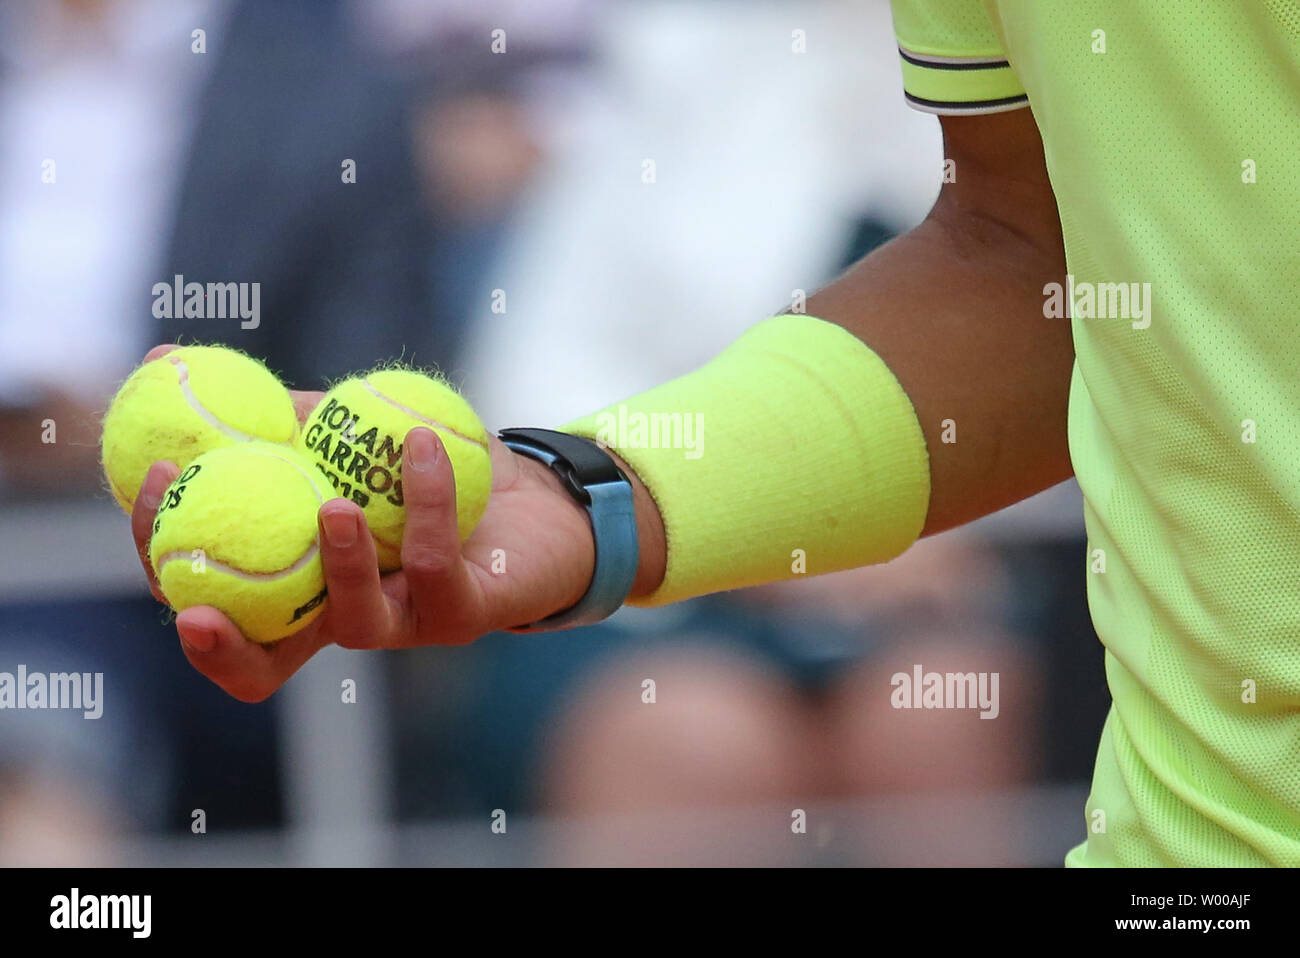 Rafael Nadal of Spain holds three tennis balls before serving during his French  Open semi-finals match against Roger Federer of Switzerland at Roland Garros  in Paris on June 7, 2019. Nadal defeated